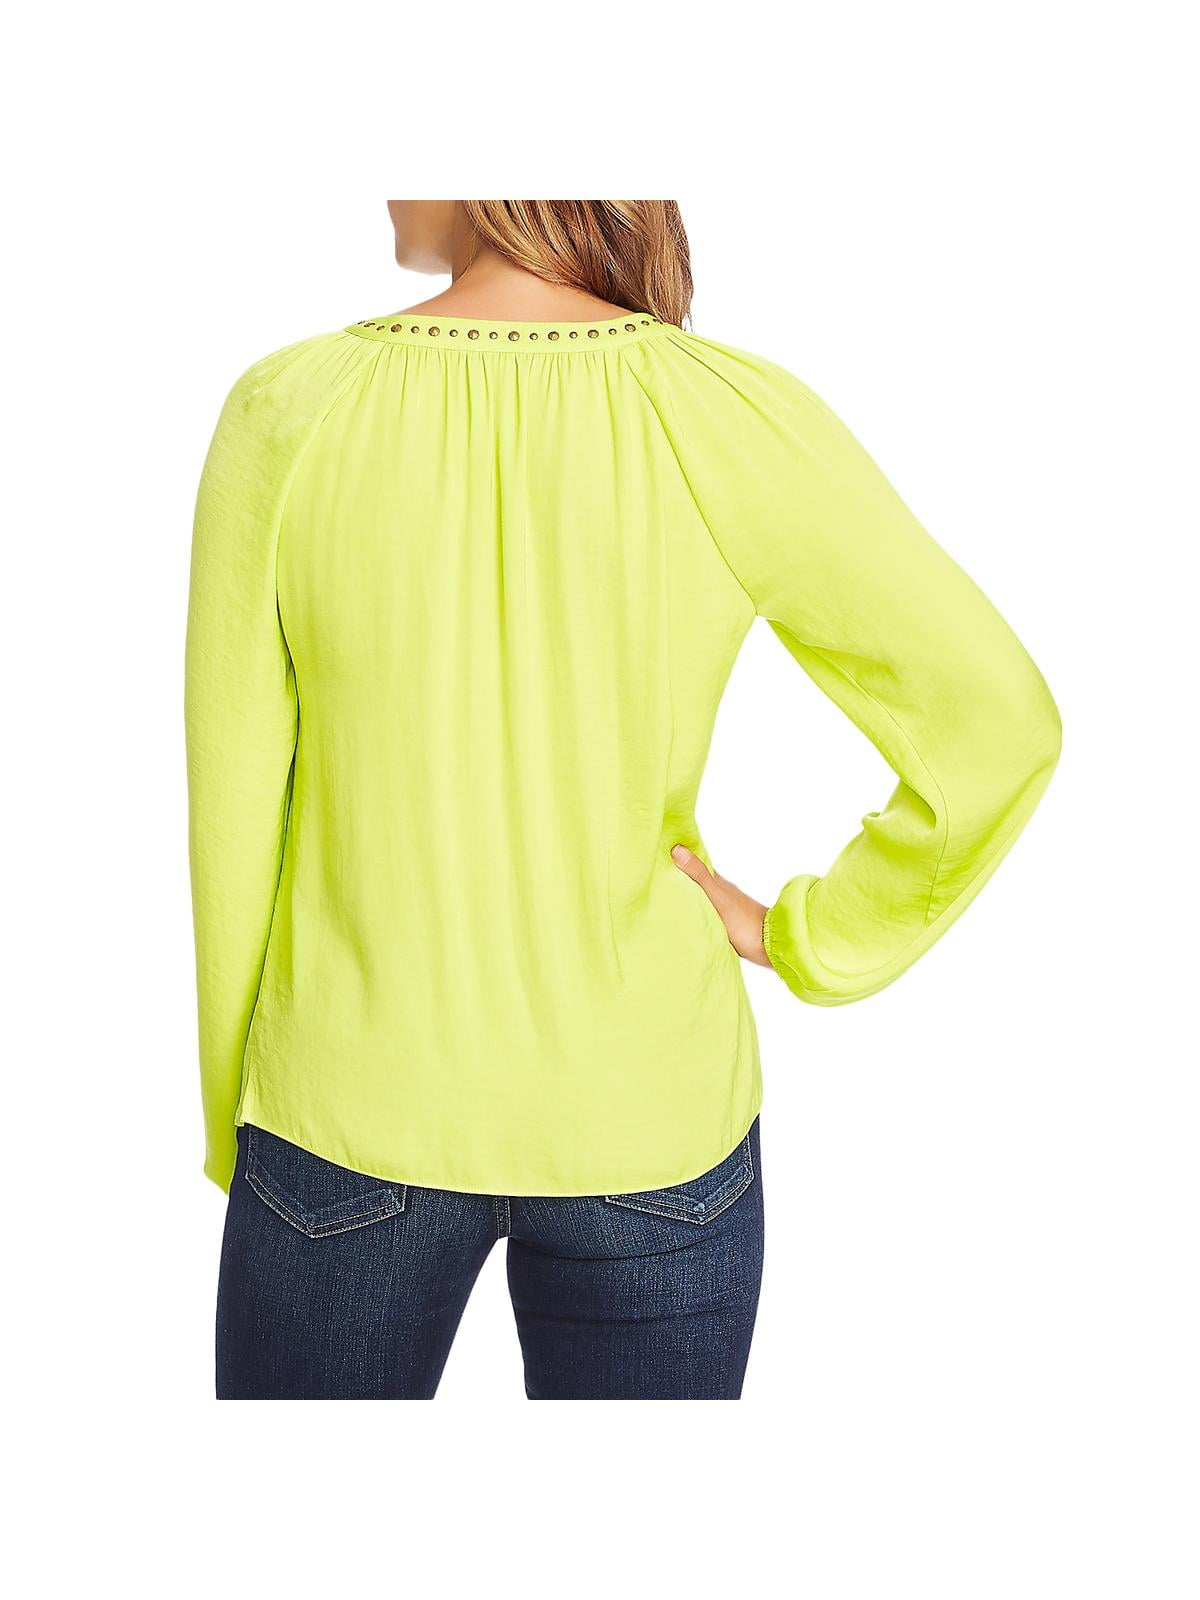 vince camuto yellow blouse